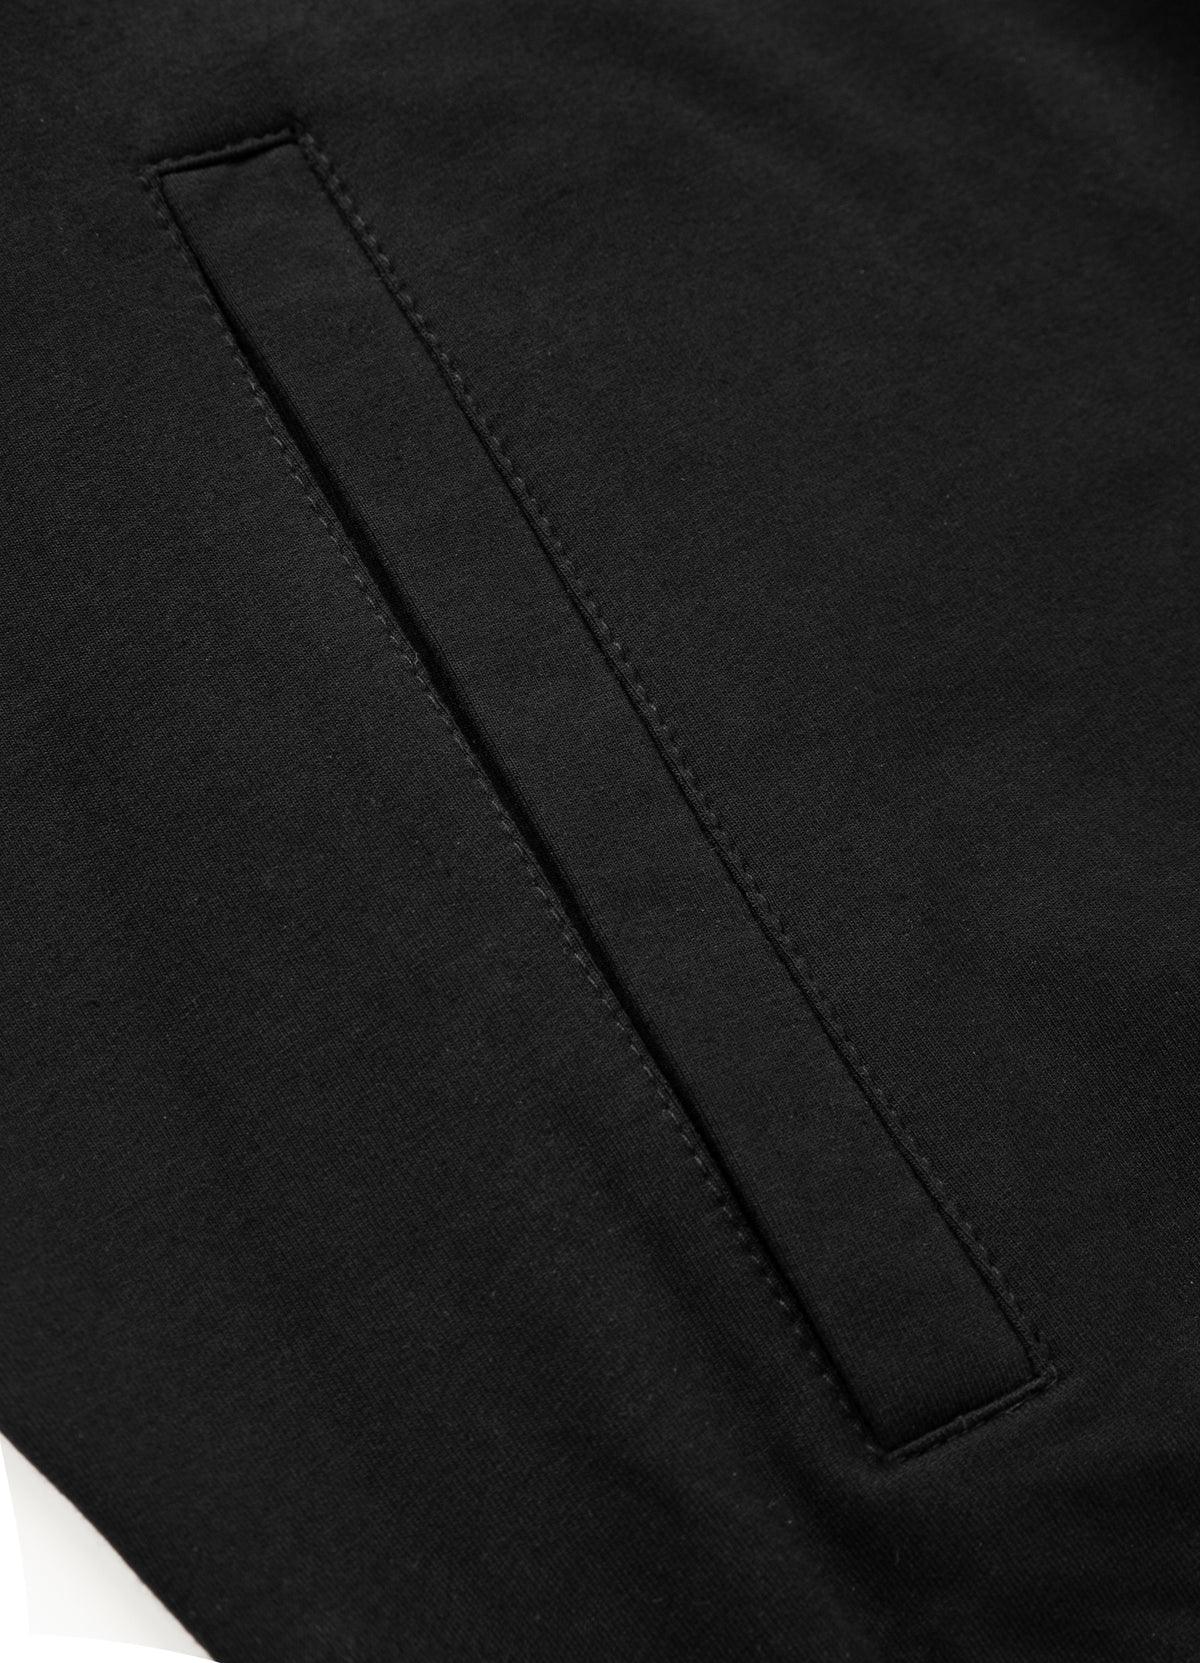 SMALL LOGO FRENCH TERRY 220 Black Sweatjacket.